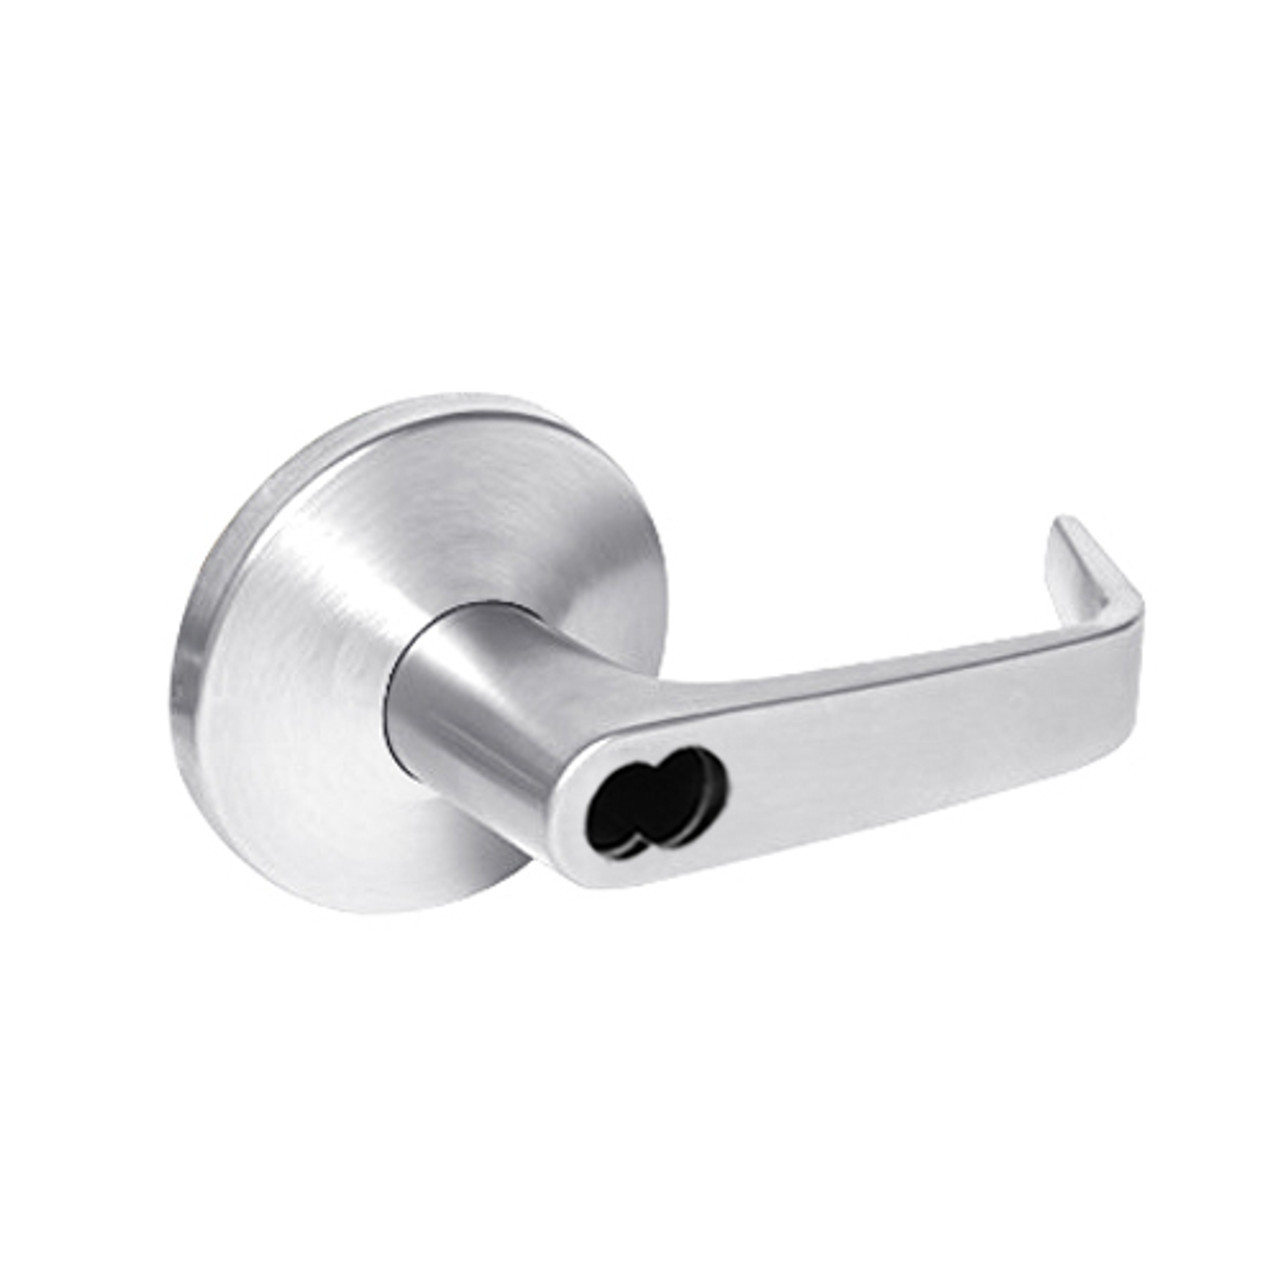 9K37DR15LSTK625LM Best 9K Series Special Function Cylindrical Lever Locks with Contour Angle with Return Lever Design Accept 7 Pin Best Core in Bright Chrome